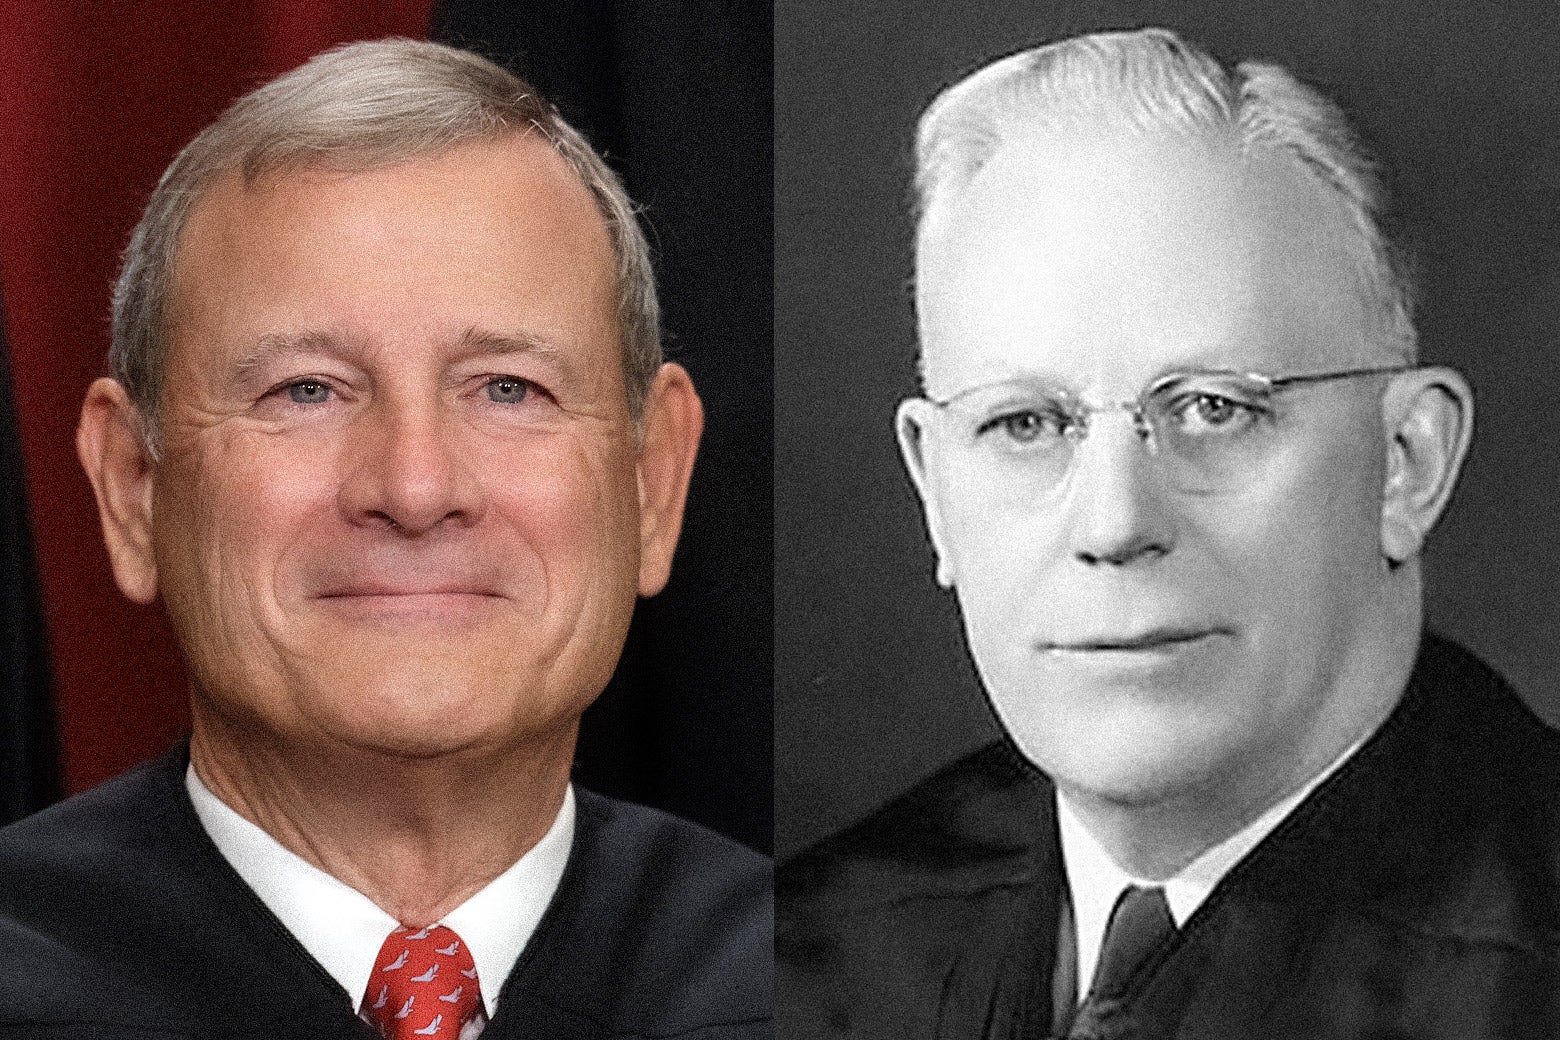 John Roberts on the left, Earl Warren on the right.